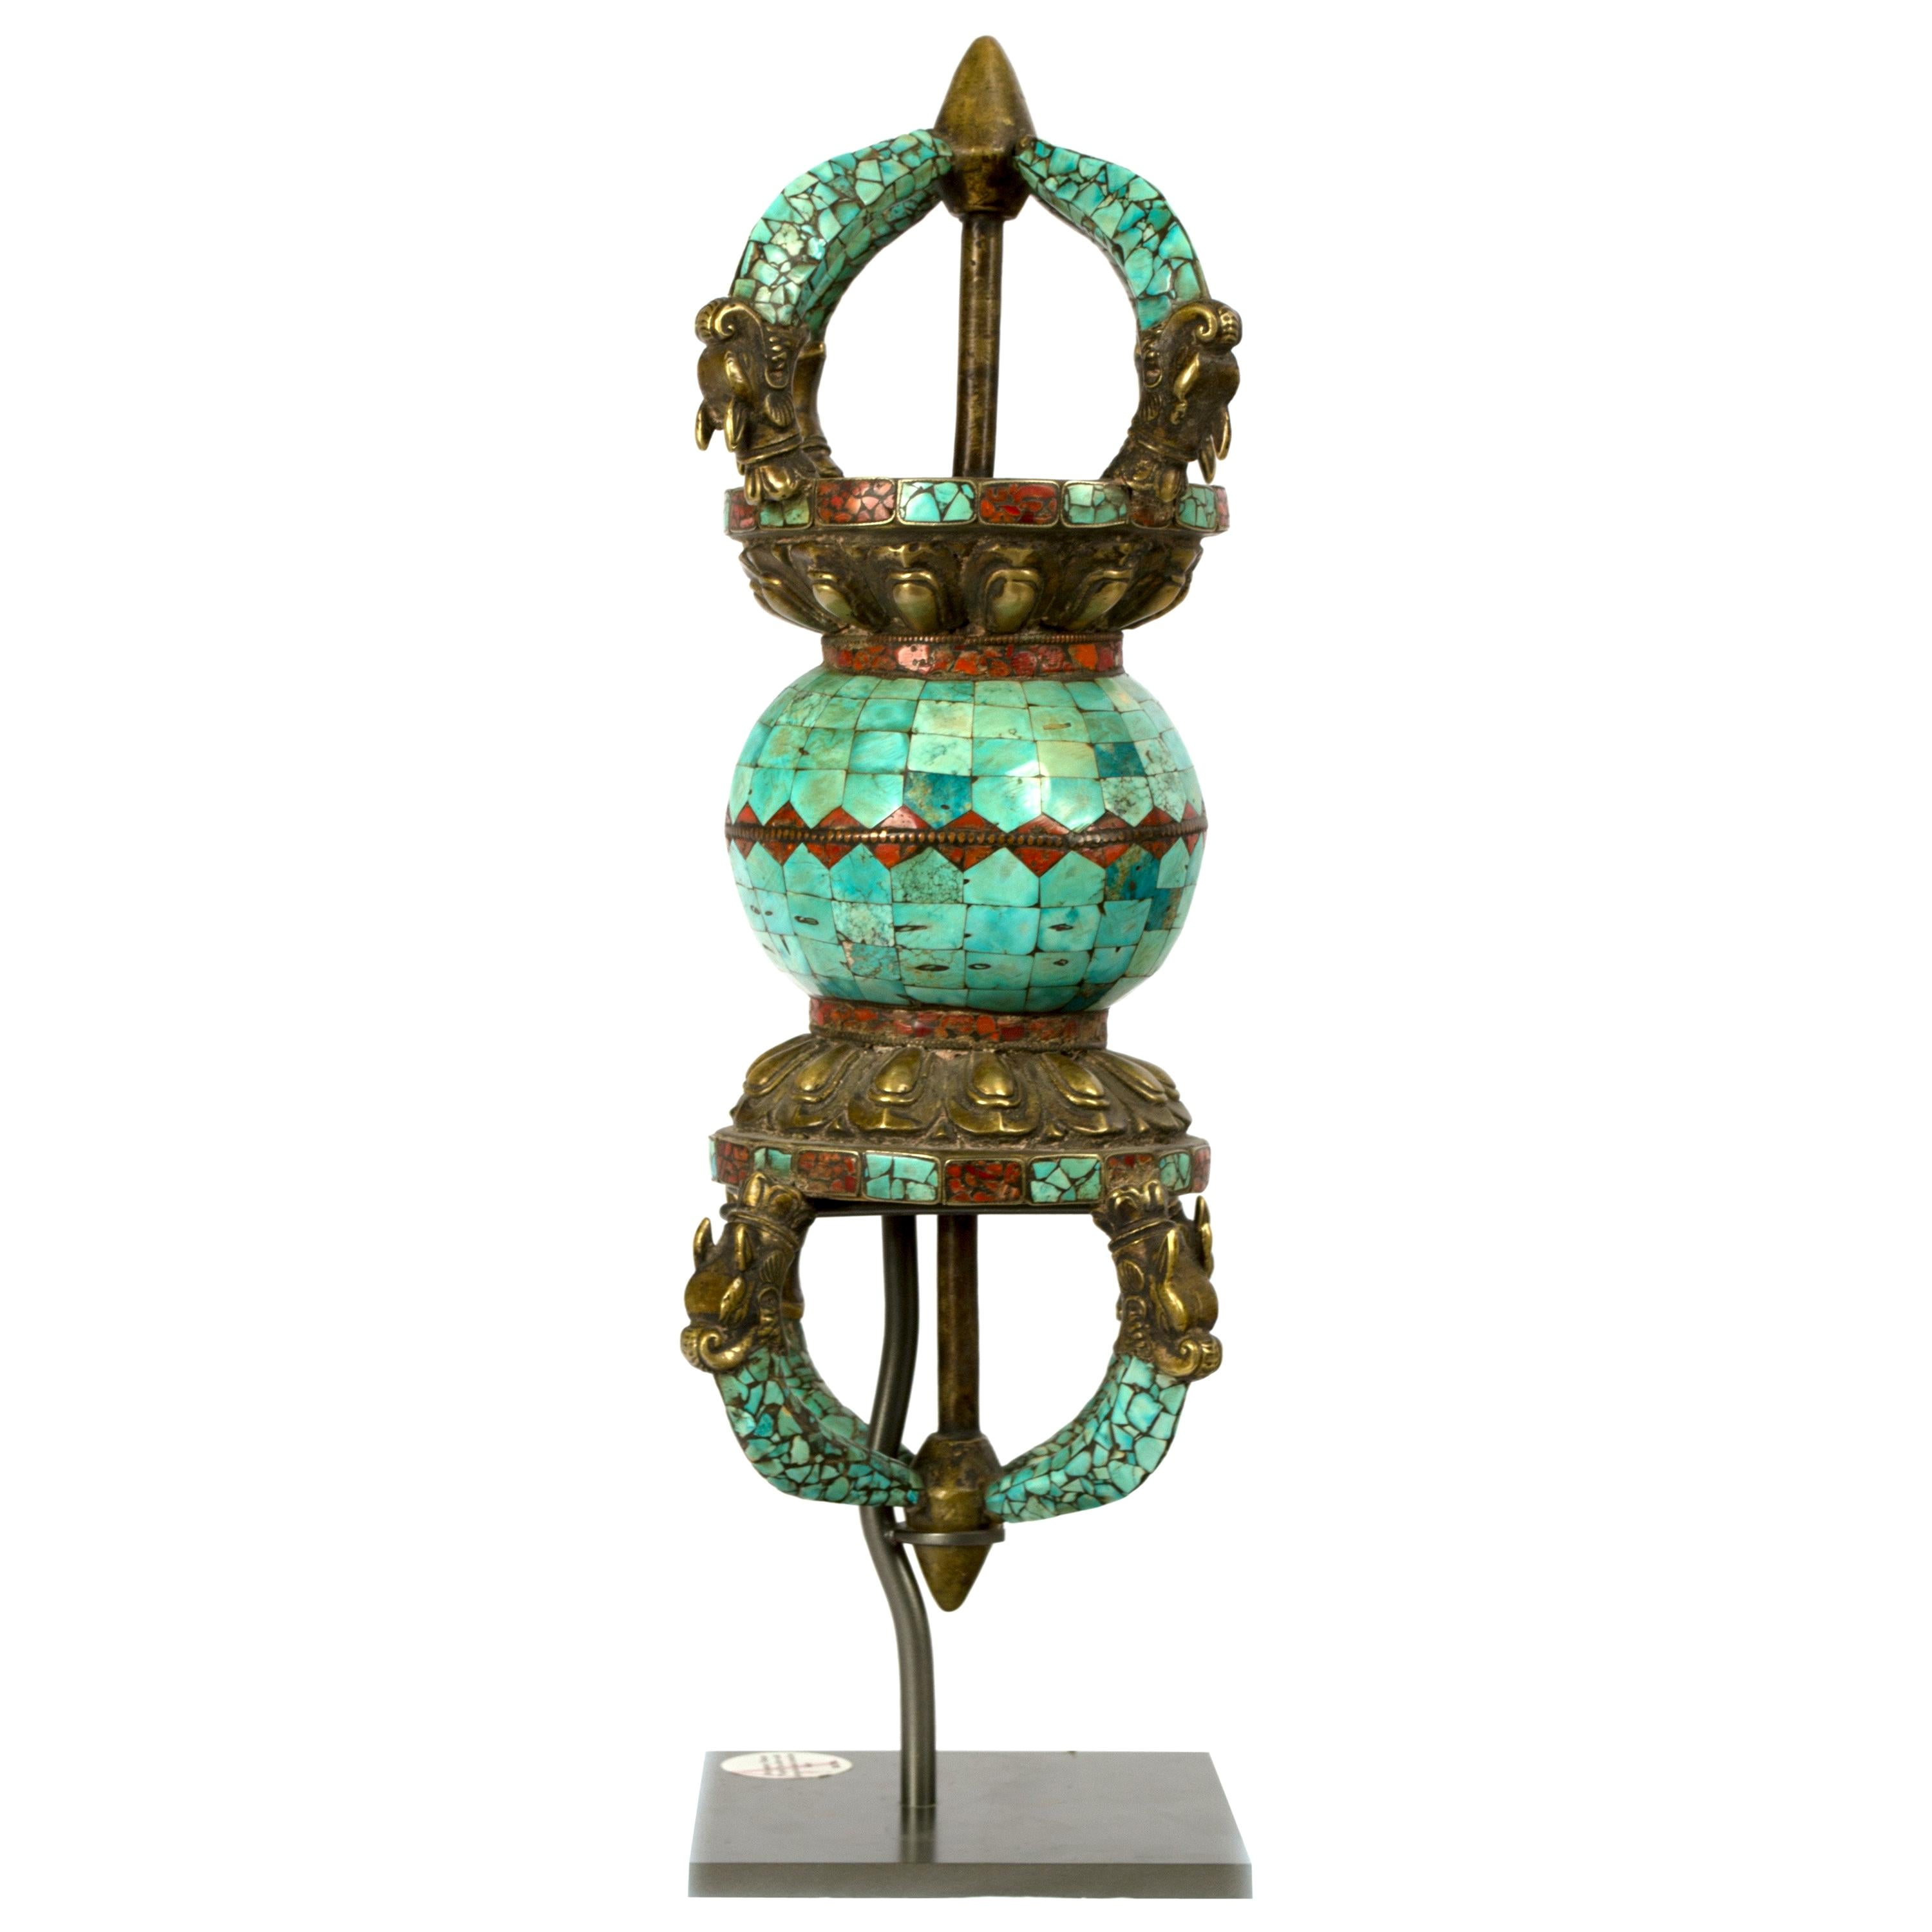 21st-Century Reproduction in the Style of Tibetan Double Vajra For Sale